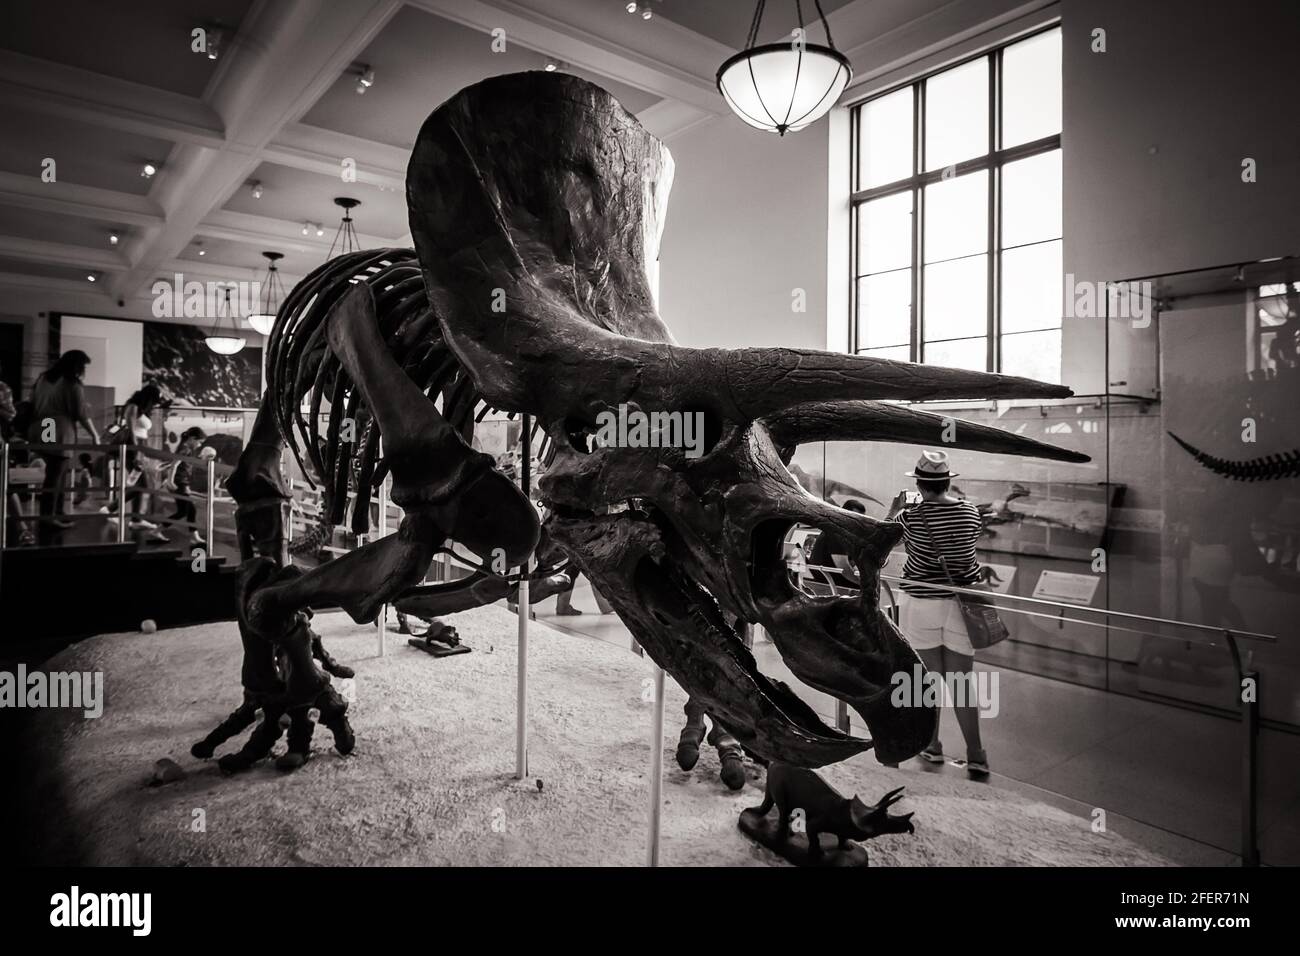 Black and white image of triceratops skeleton at American Museum of Natural History in New York City Stock Photo